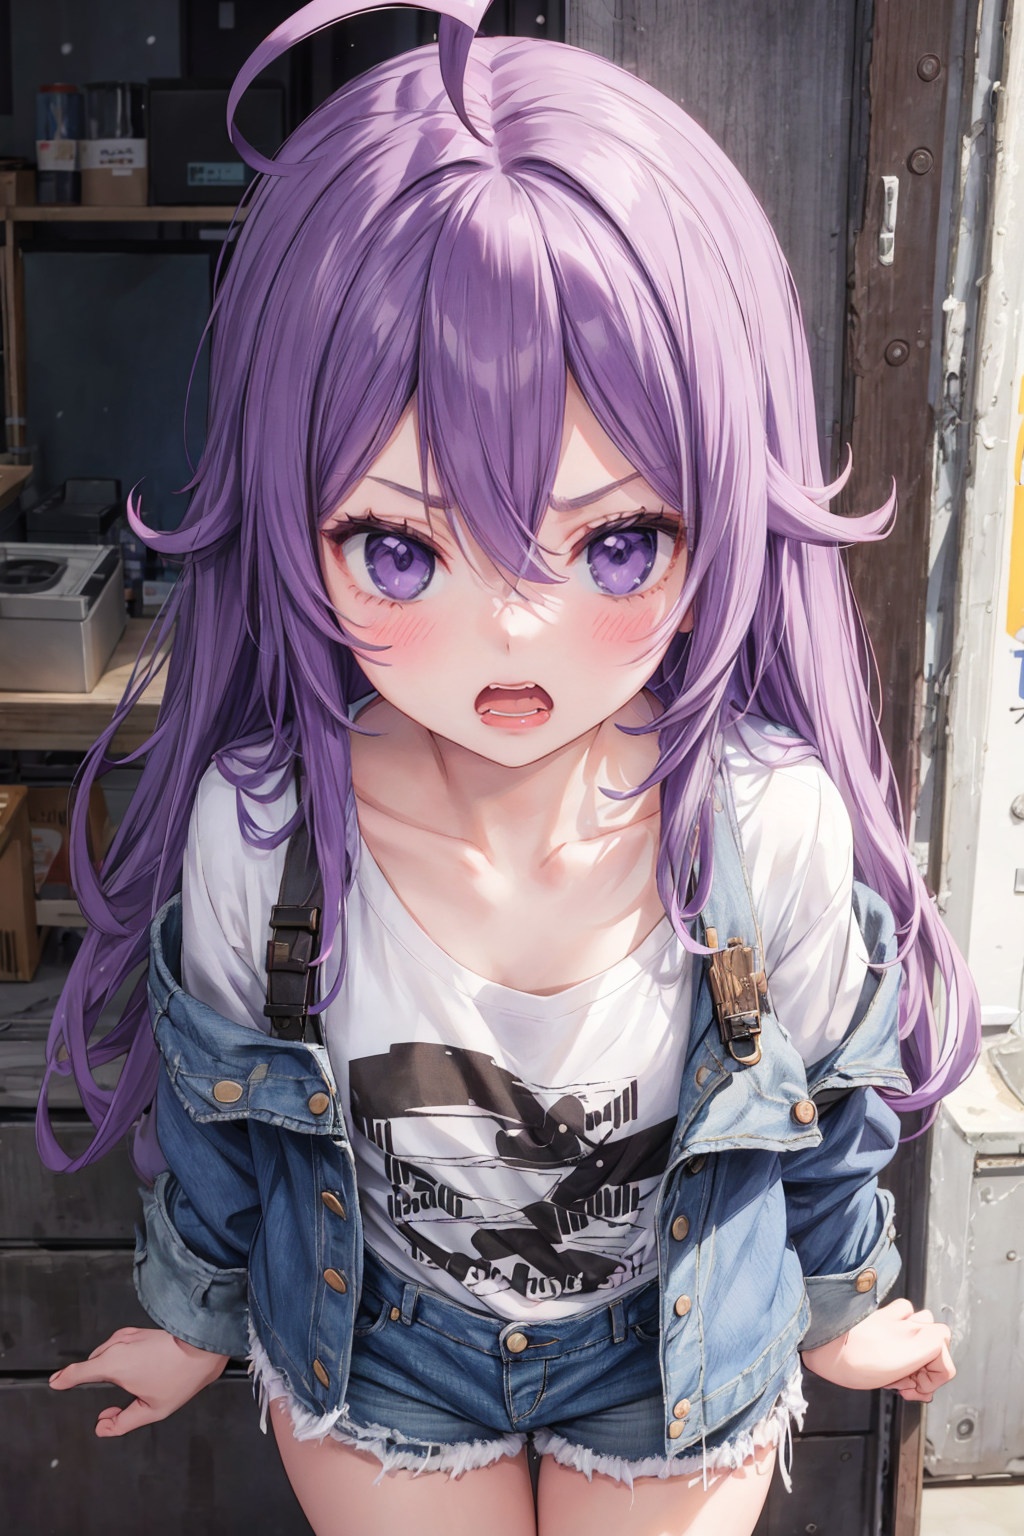 boiling-gnu366: Cute anime girl tennis light purple hair girl with a blue  eyes. 15 years old. anime plain white long sleeved button-up shirt. tattoo  on neck that it's the number 54829